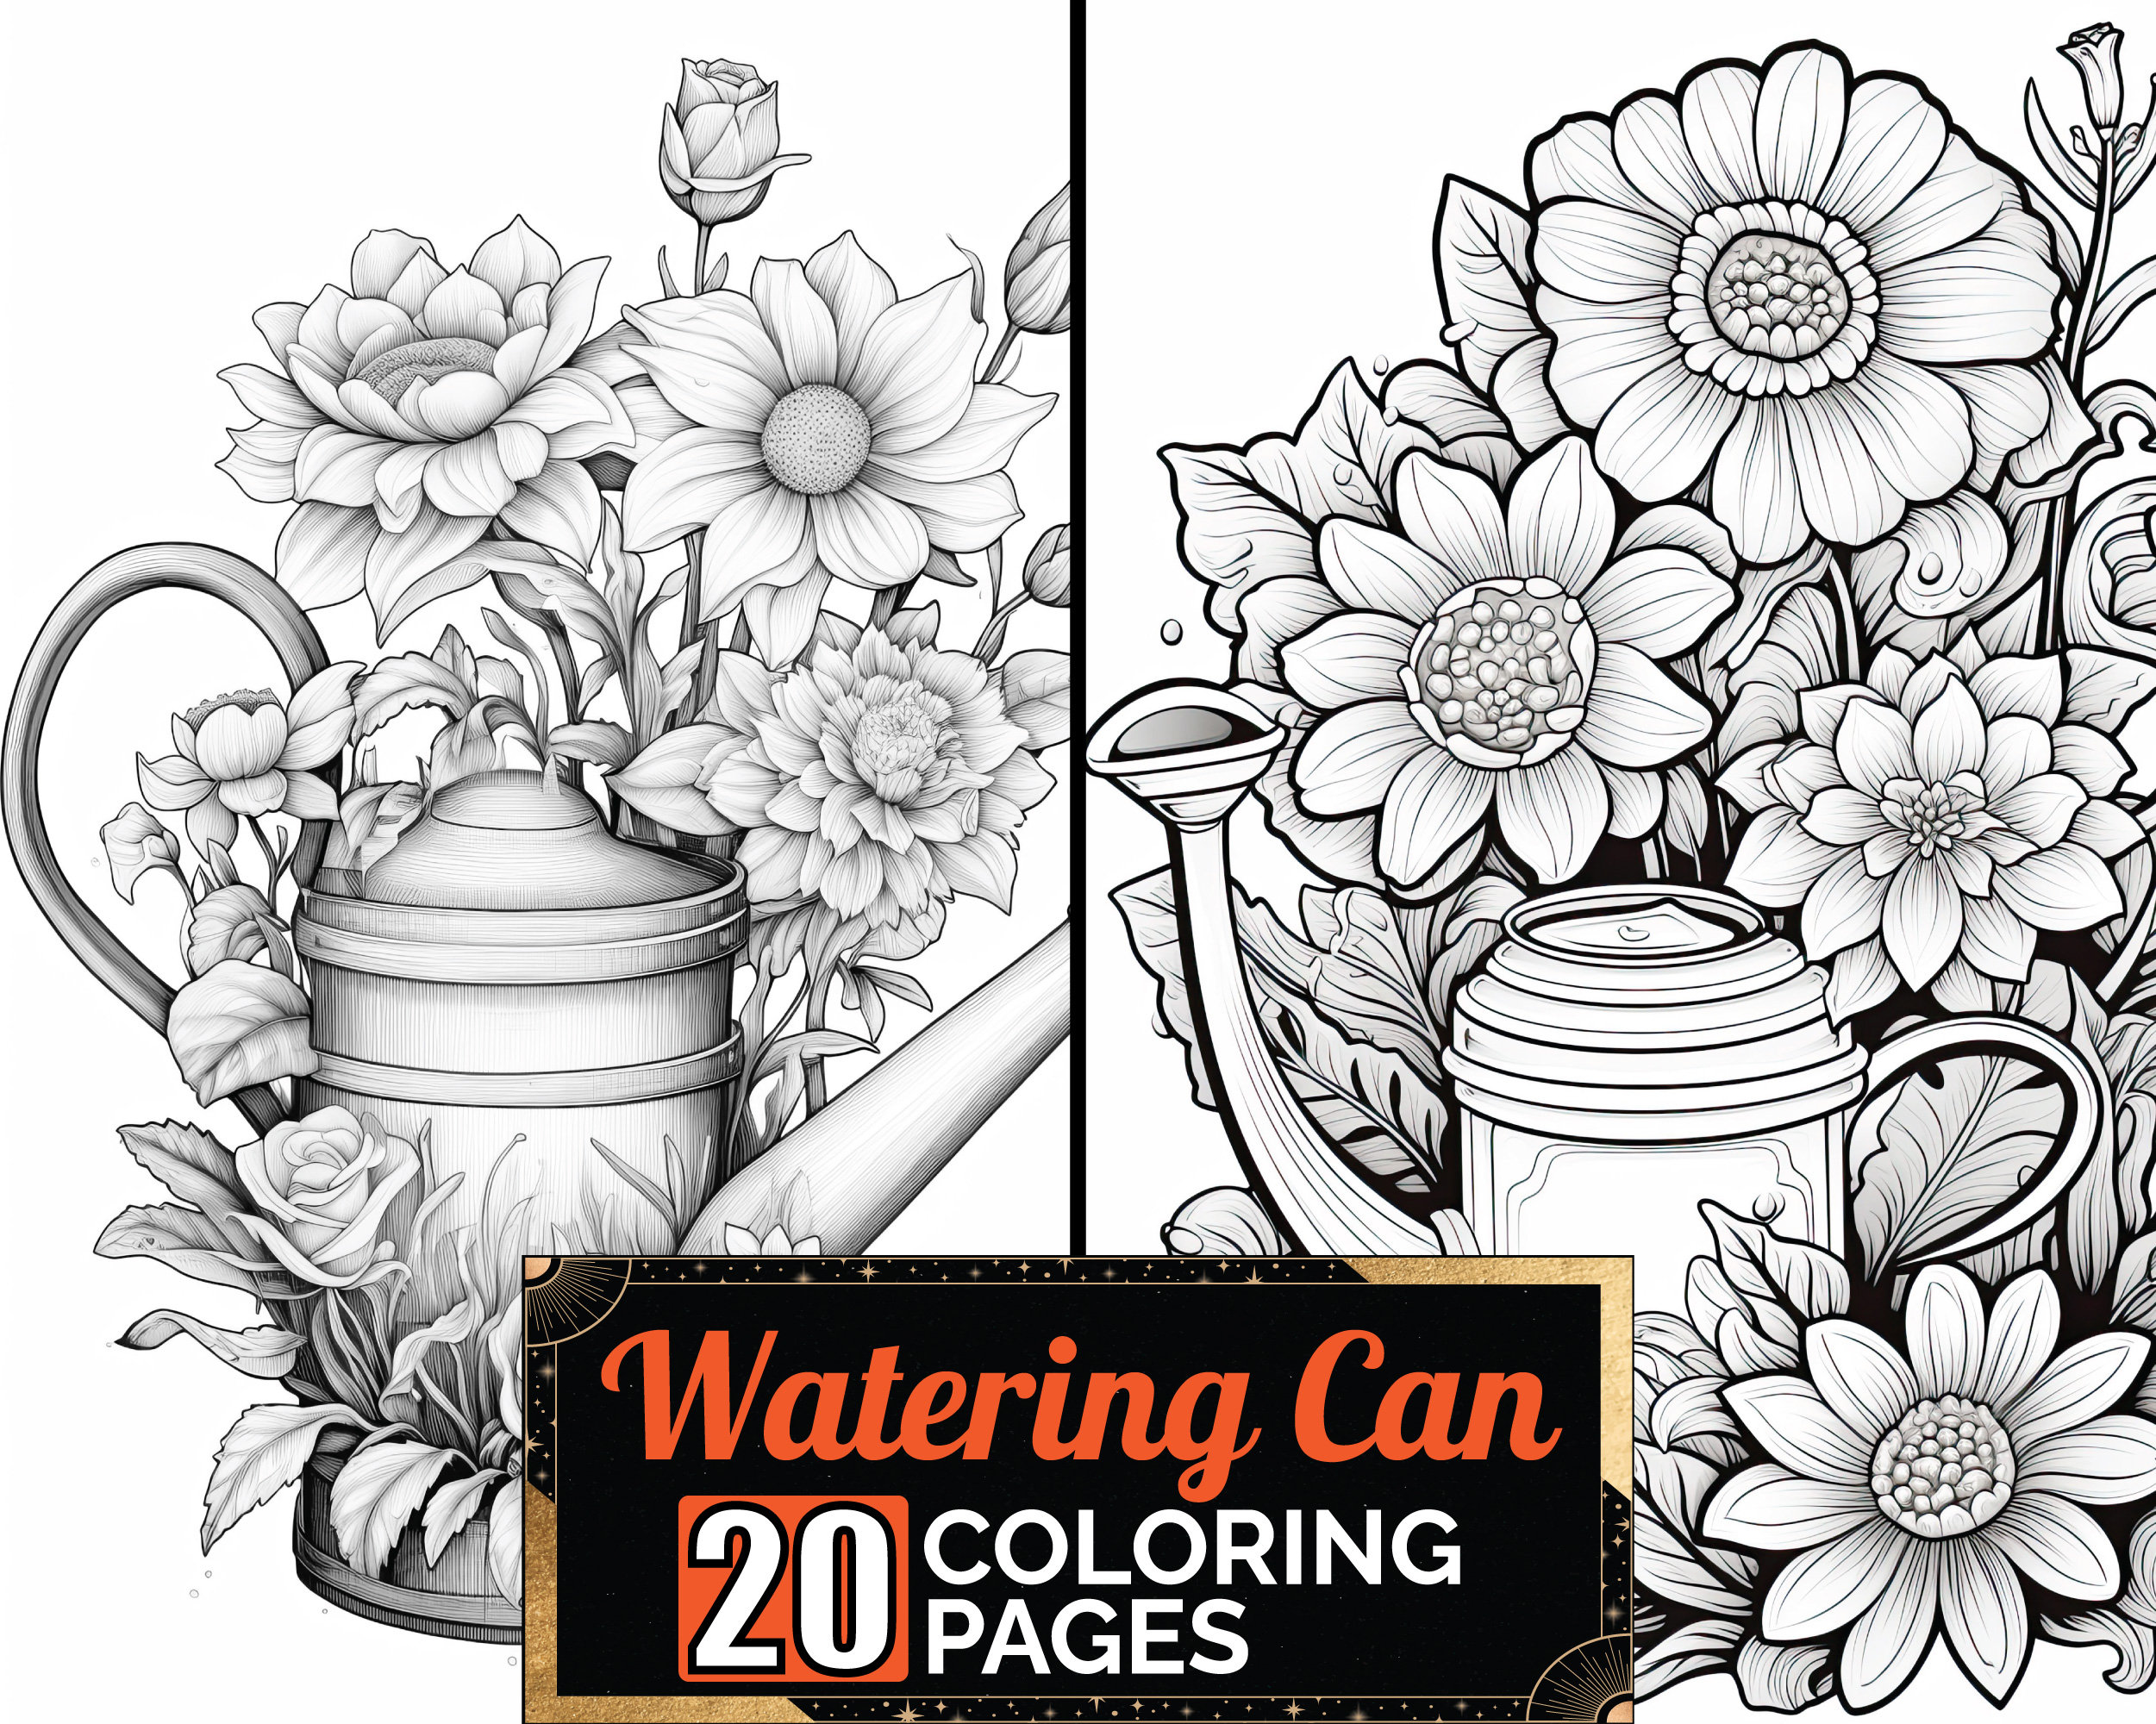 Flower watering can coloring book detail greyscale adult kids floral colouring page a size sheet printable digital pdf download download now